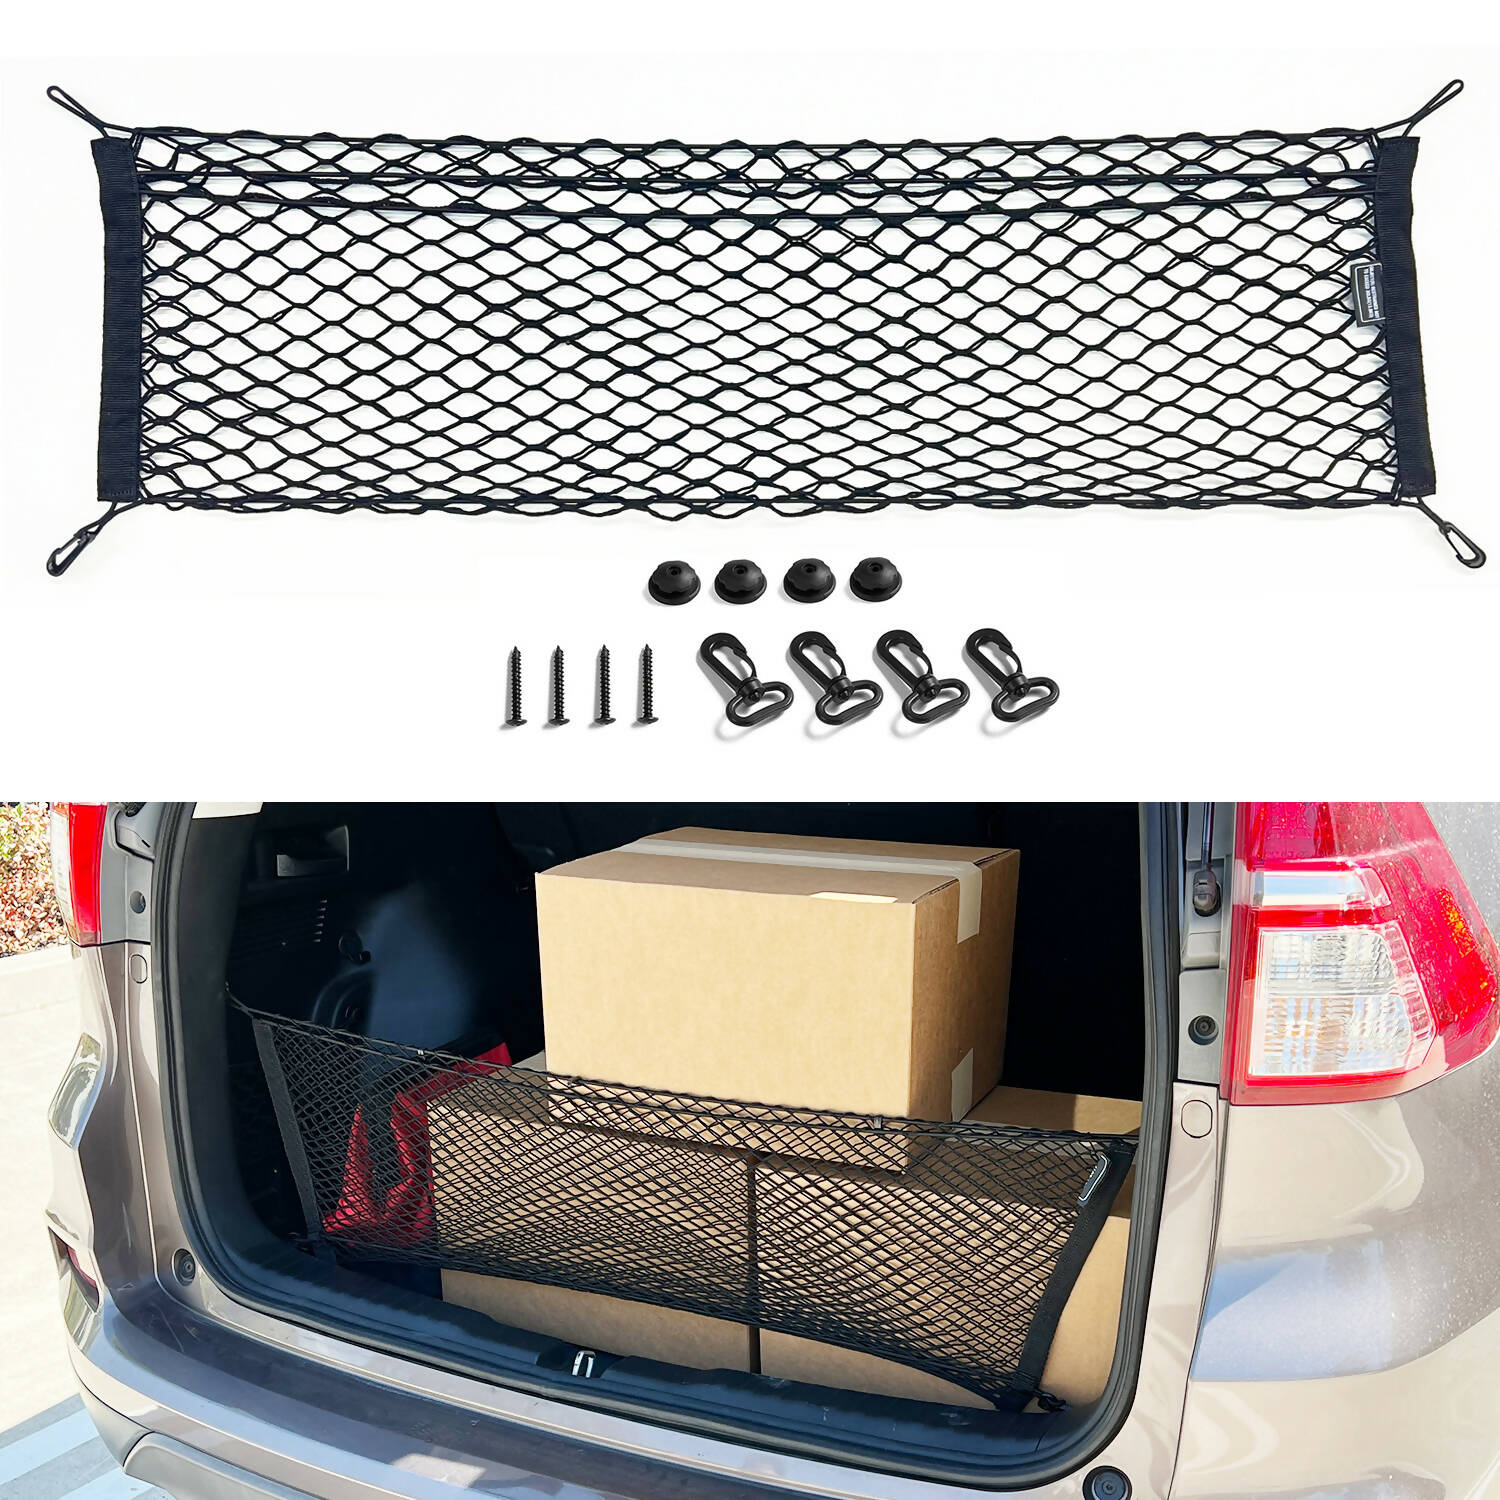 |AUTOWEAR| Universal Cargo Net for Sedan or SUV [MADE IN USA]